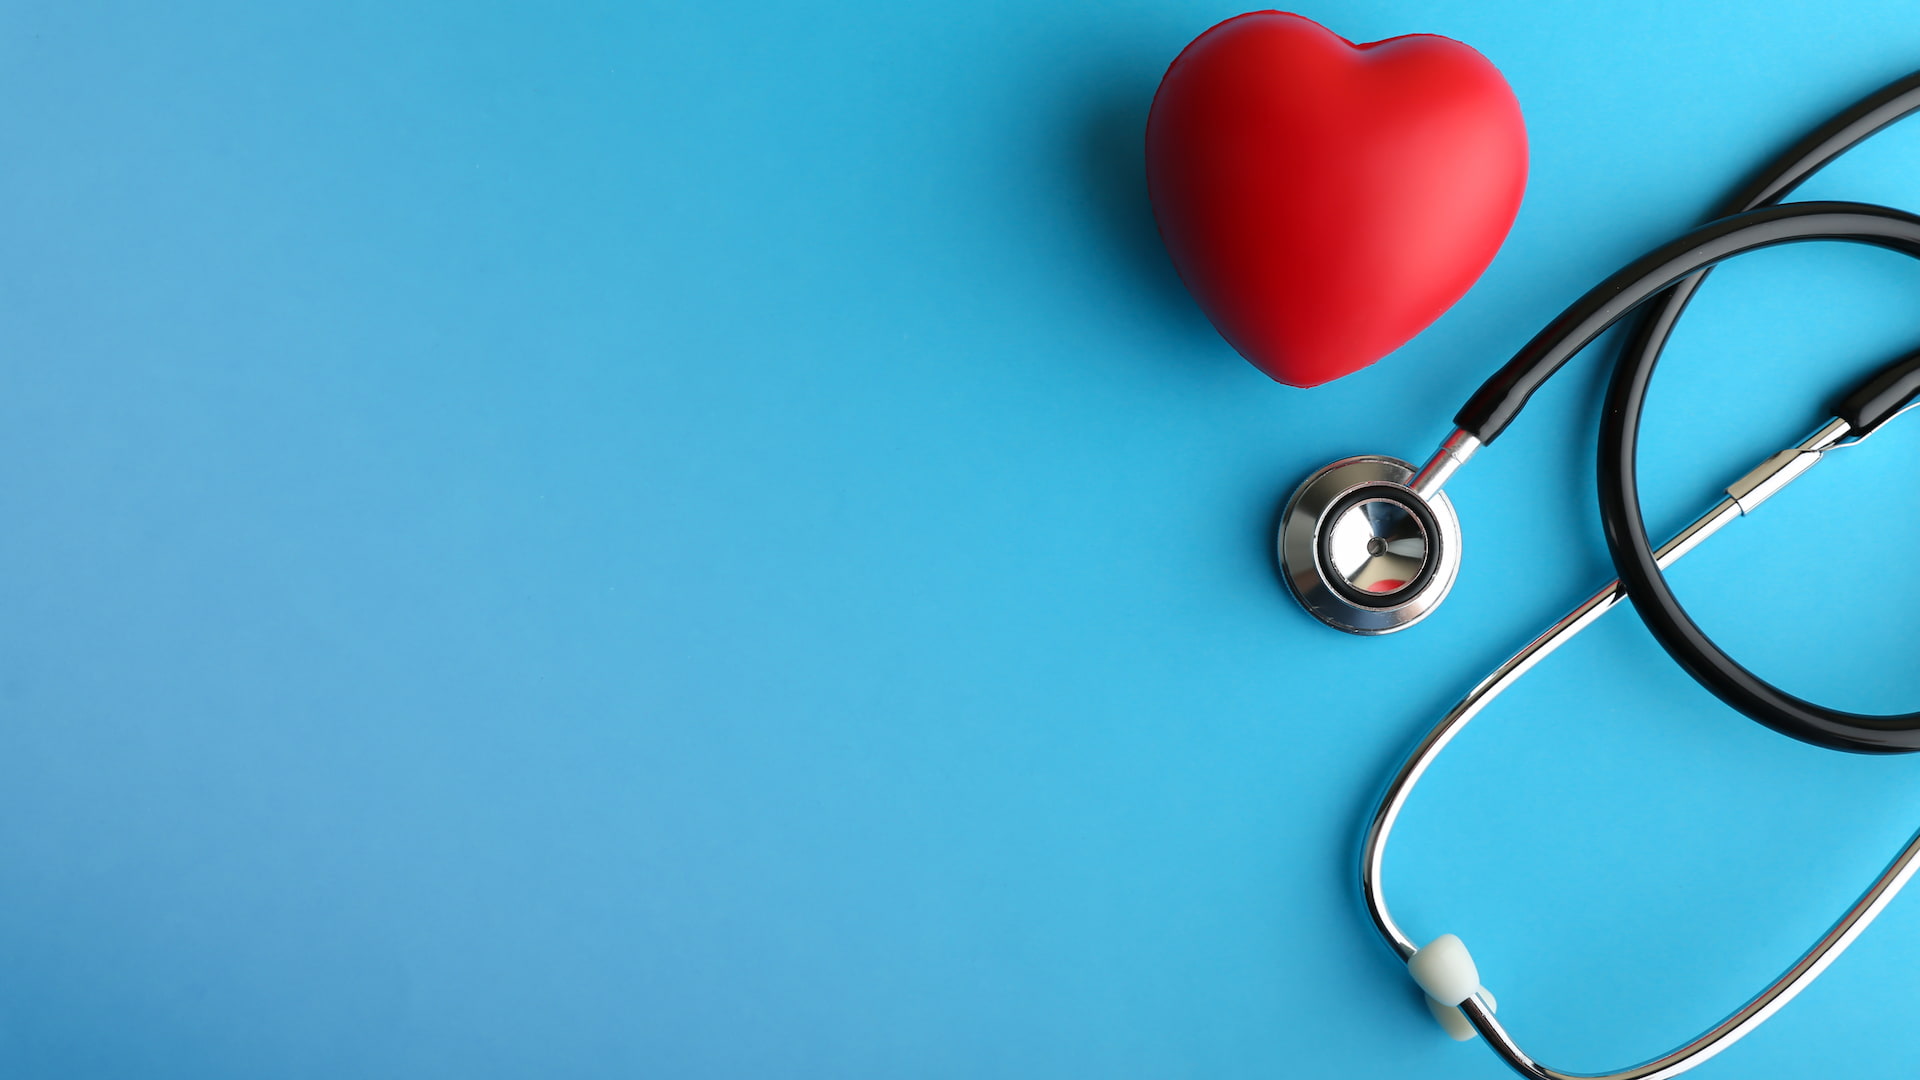 A bright red plastic heart with a stethoscope on a light blue background. Photo: iStock